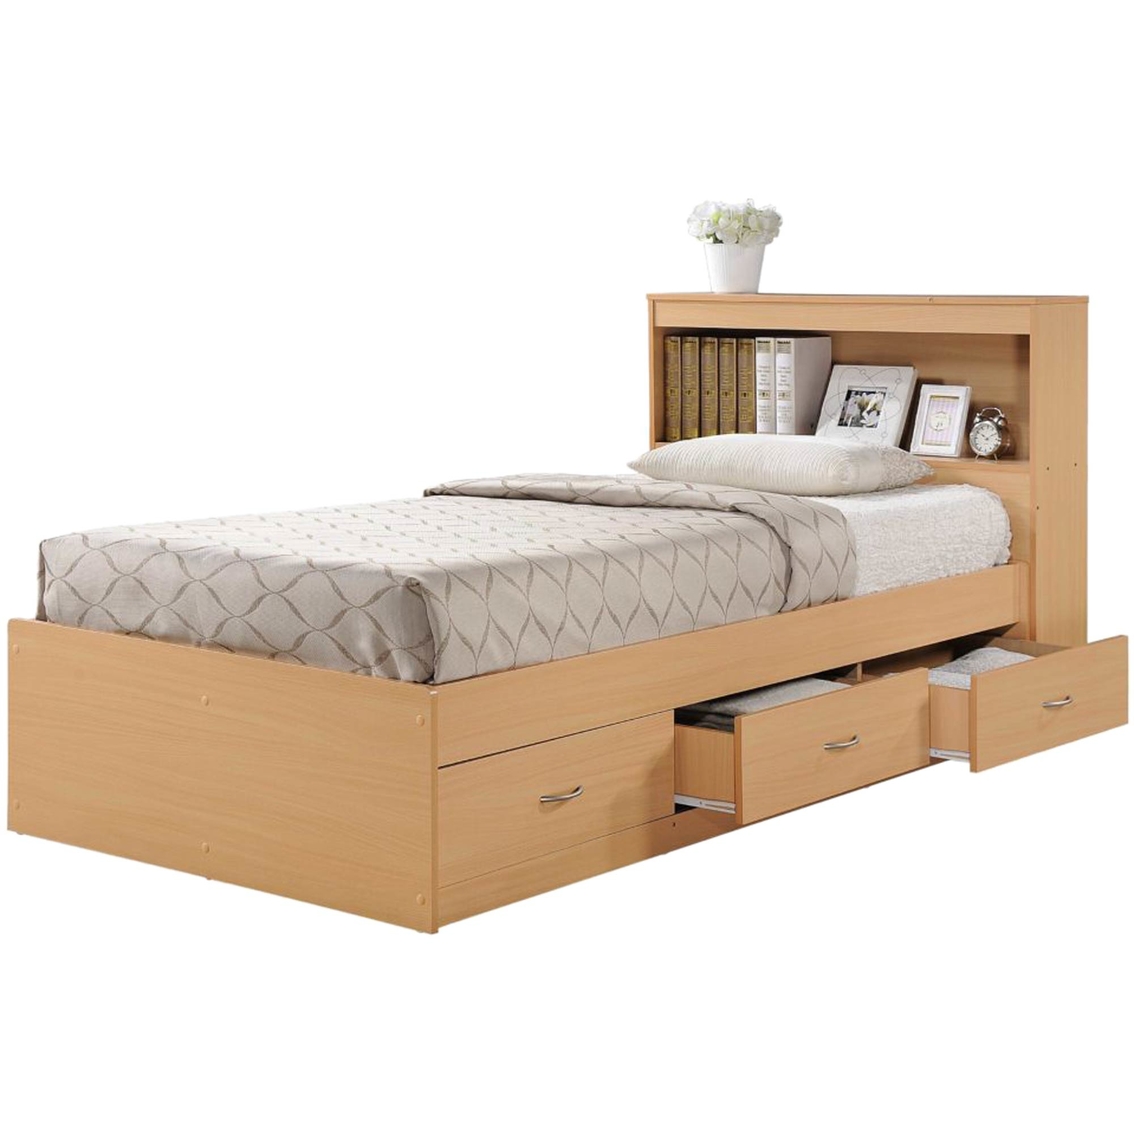 Hodedah Twin Captain Bed With 3 Drawers And Headboard Beds